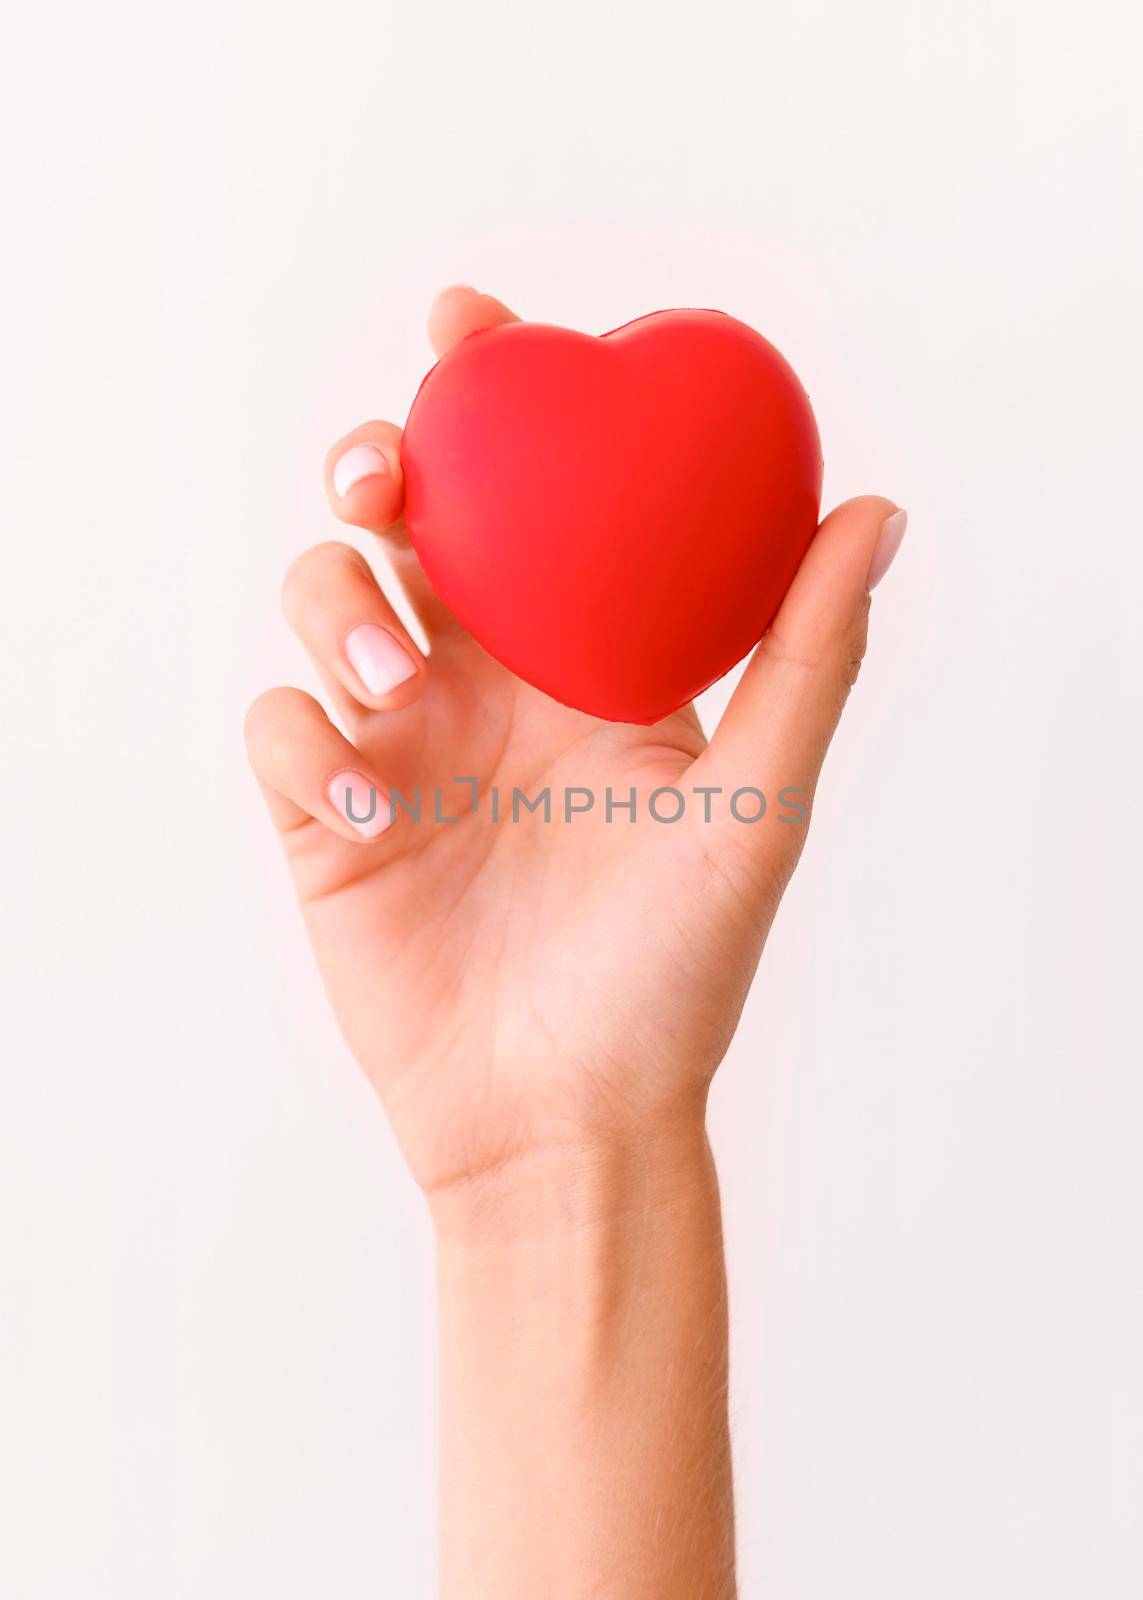 front view hand holding heart shape. High quality photo by Zahard